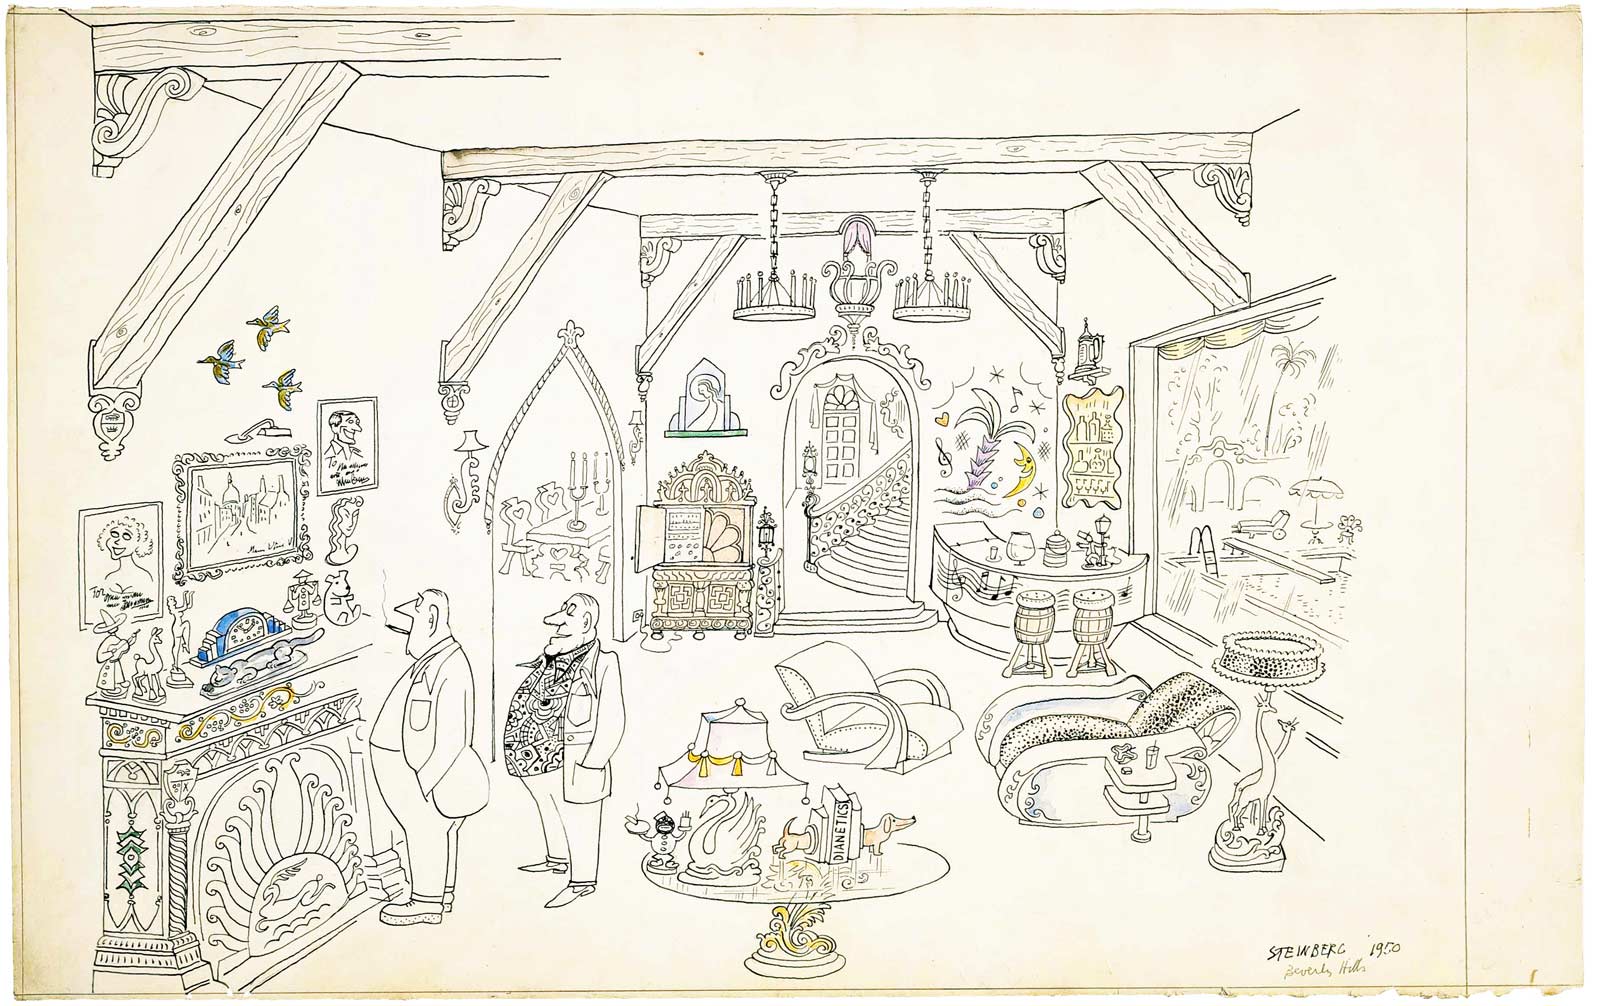 Original drawing for the portfolio “The Coast,” The New Yorker, January 27, 1951. Beverly Hills, 1950, ink on paper, 14 ½ x 23 1/8 in. Saul Steinberg Papers, Beinecke Rare Book and Manuscript Library, Yale University.